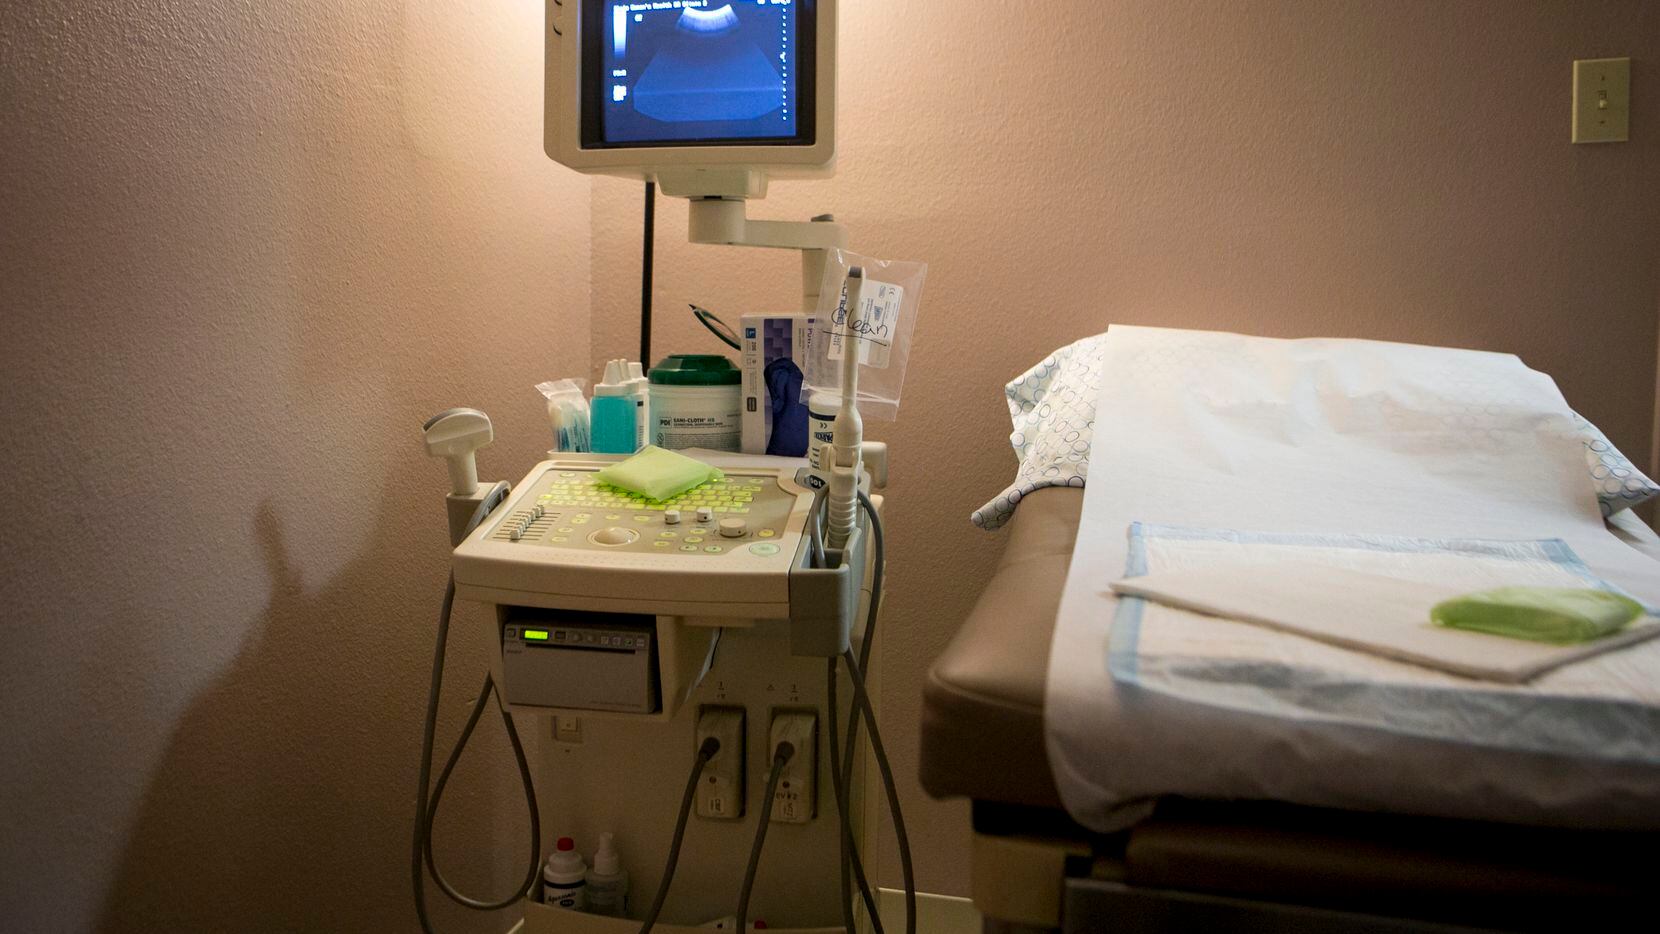 Texas' new abortion rules have created a climate of fear among health care providers.